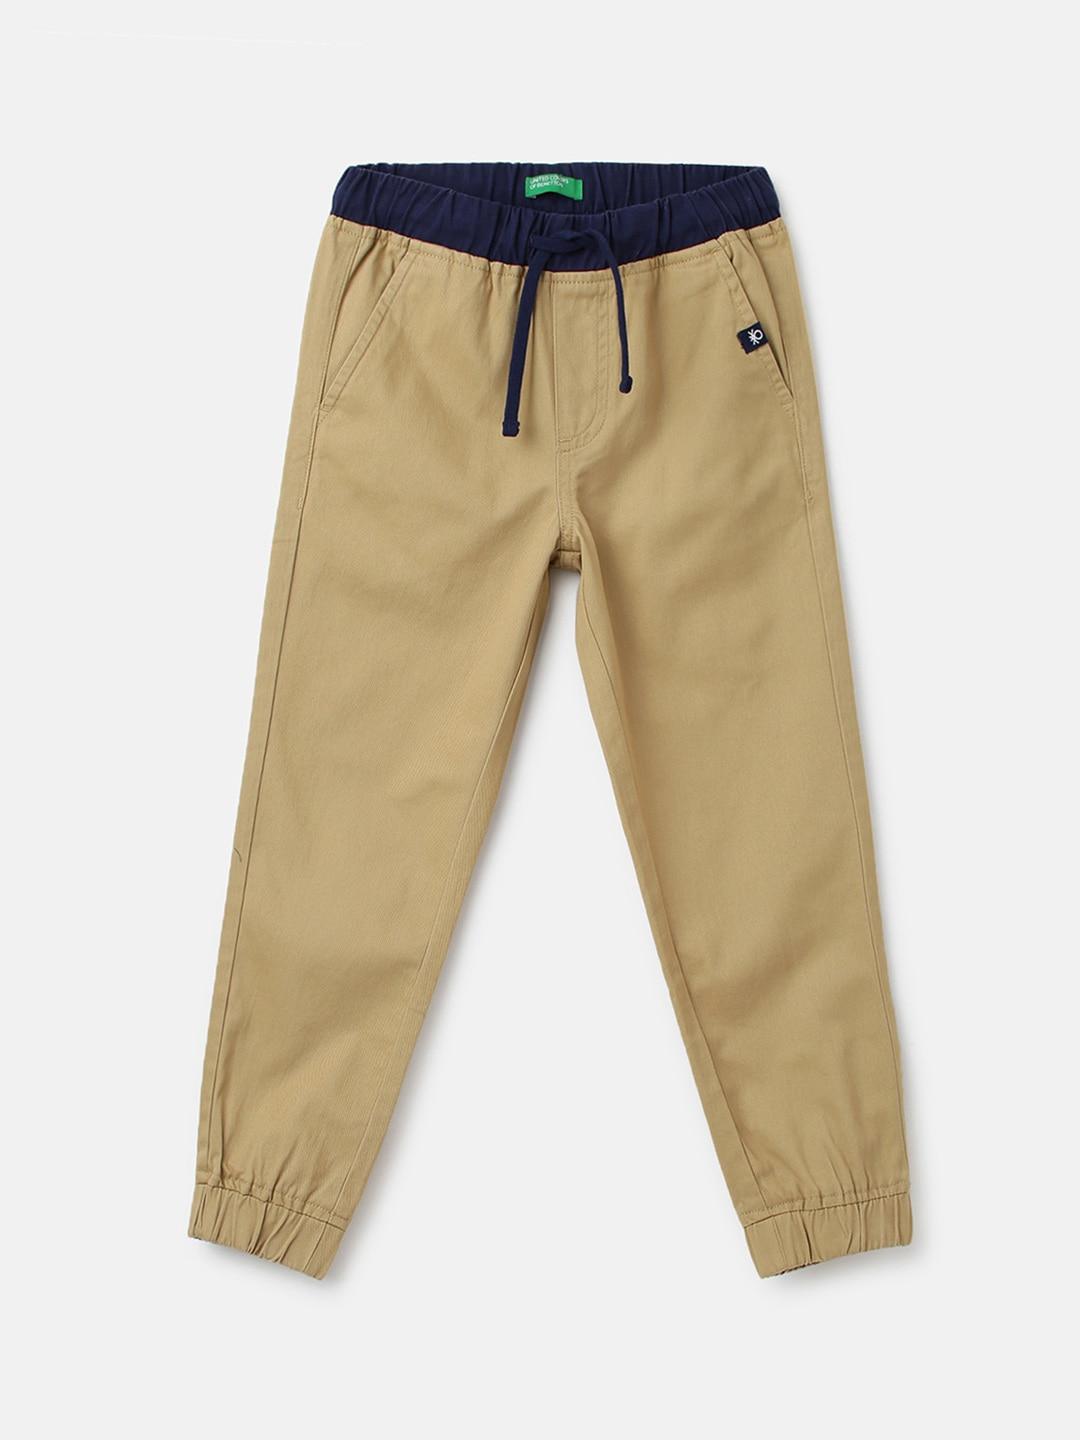 United Colors of Benetton Boys Cotton Joggers